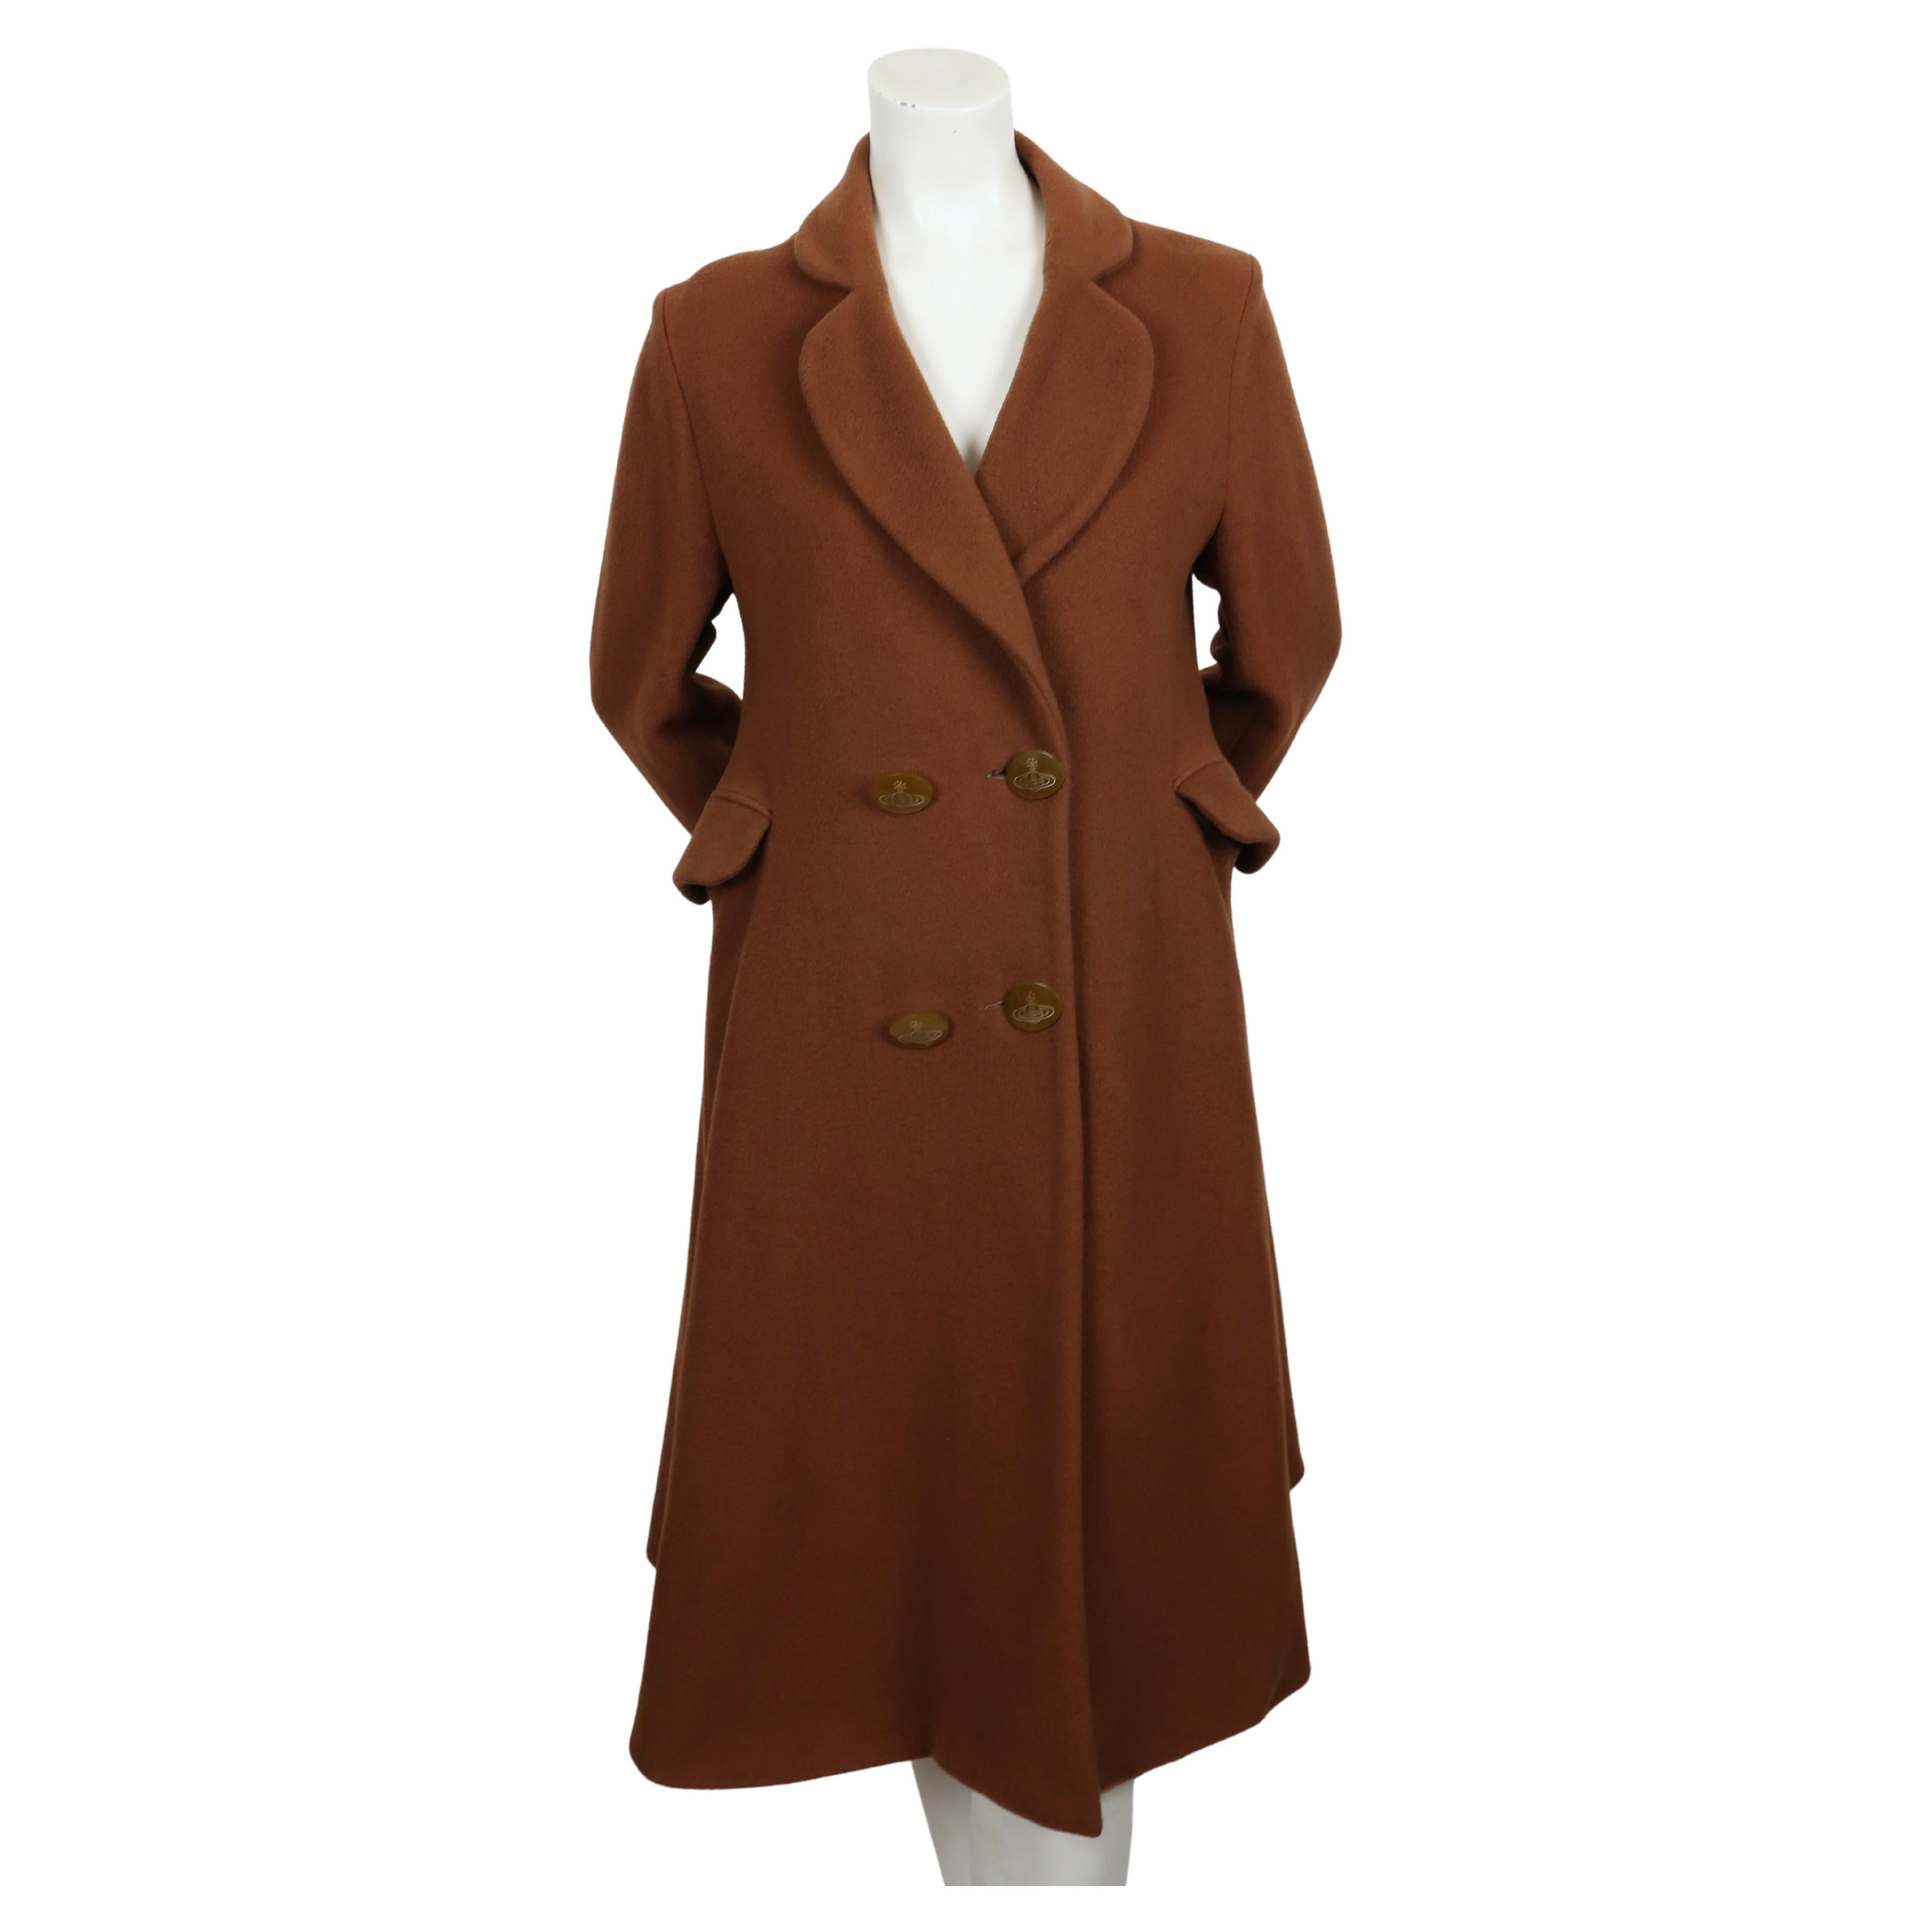 Very rare, cinnabar brown wool coat with signature orb buttons and heart shaped lapels designed by Vivienne Westwood dating to fall of 1988 as seen on the 'Time Machine' runway.  Coat has a really great silhouette.  Coat is labeled a UK size '12',